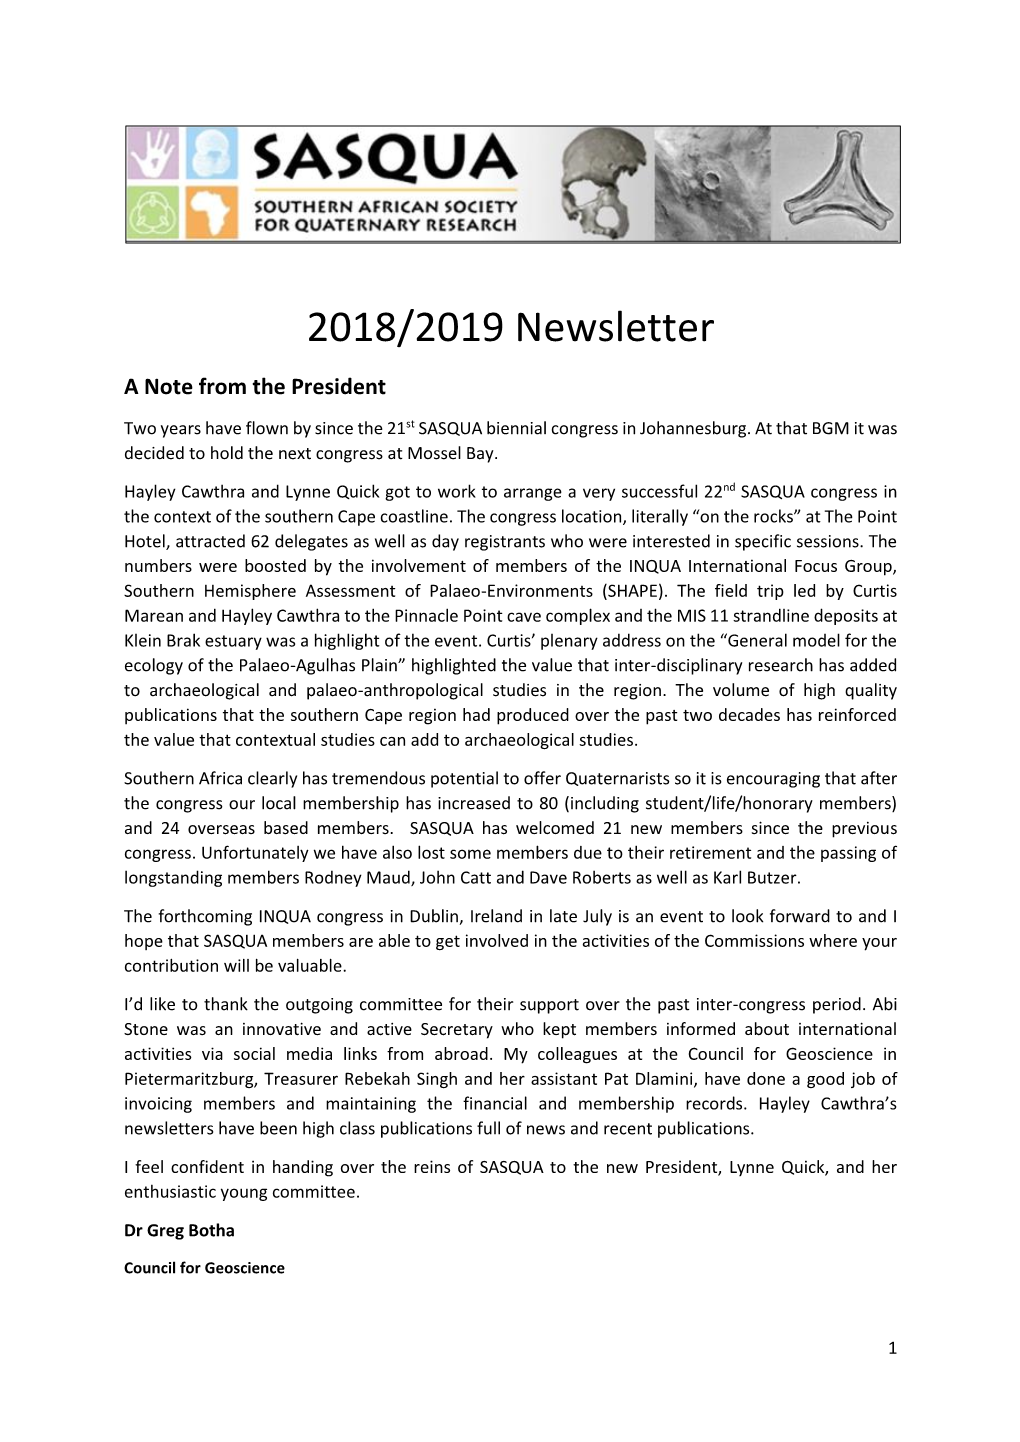 2018/2019 Newsletter a Note from the President